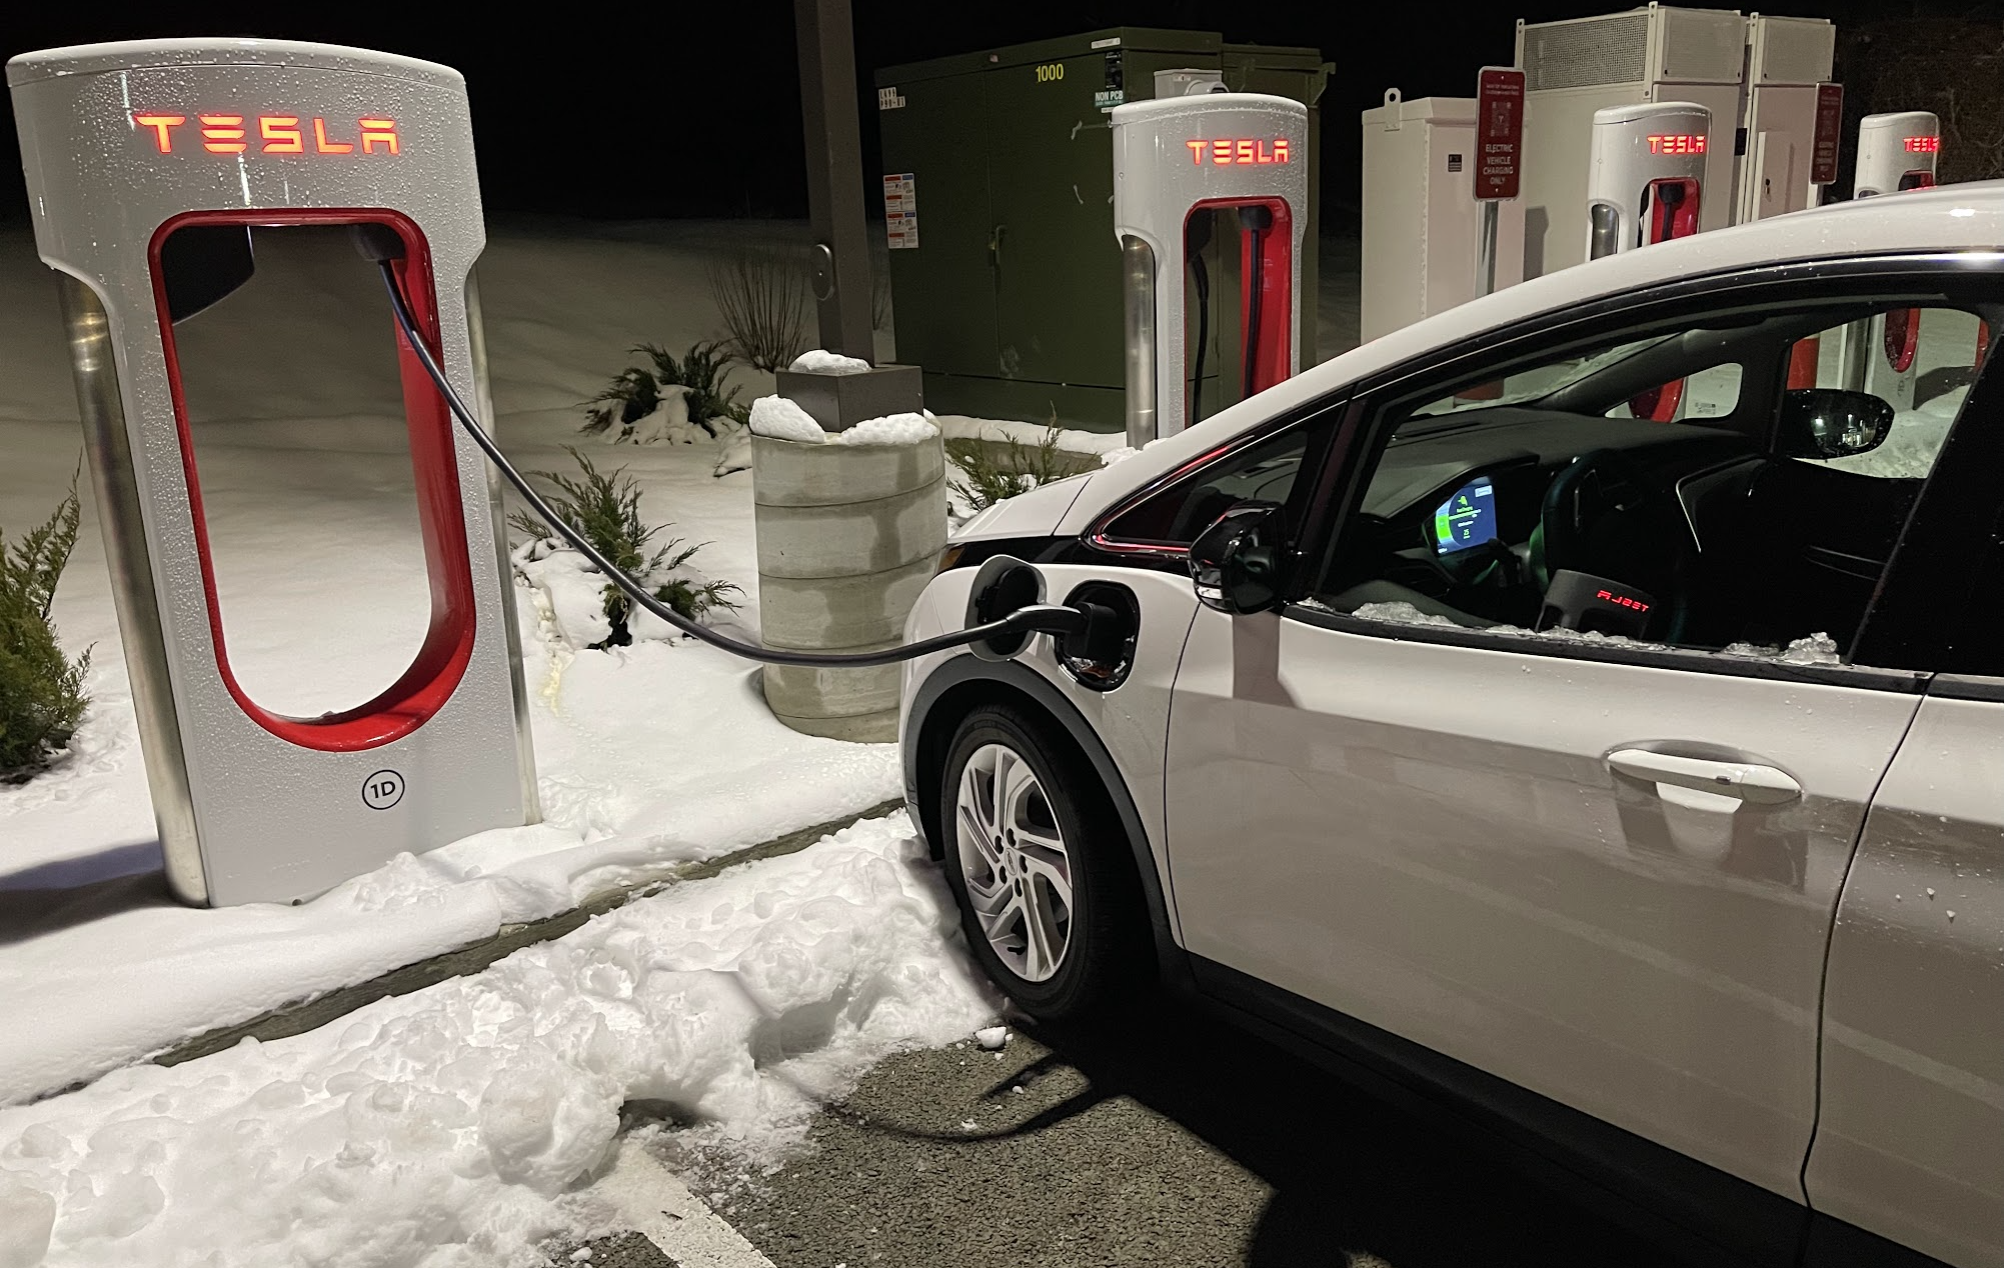 We Plugged a Ford, a Hyundai, and a VW into Tesla's Magic Dock  Superchargers. Only Two Vehicles Charged.